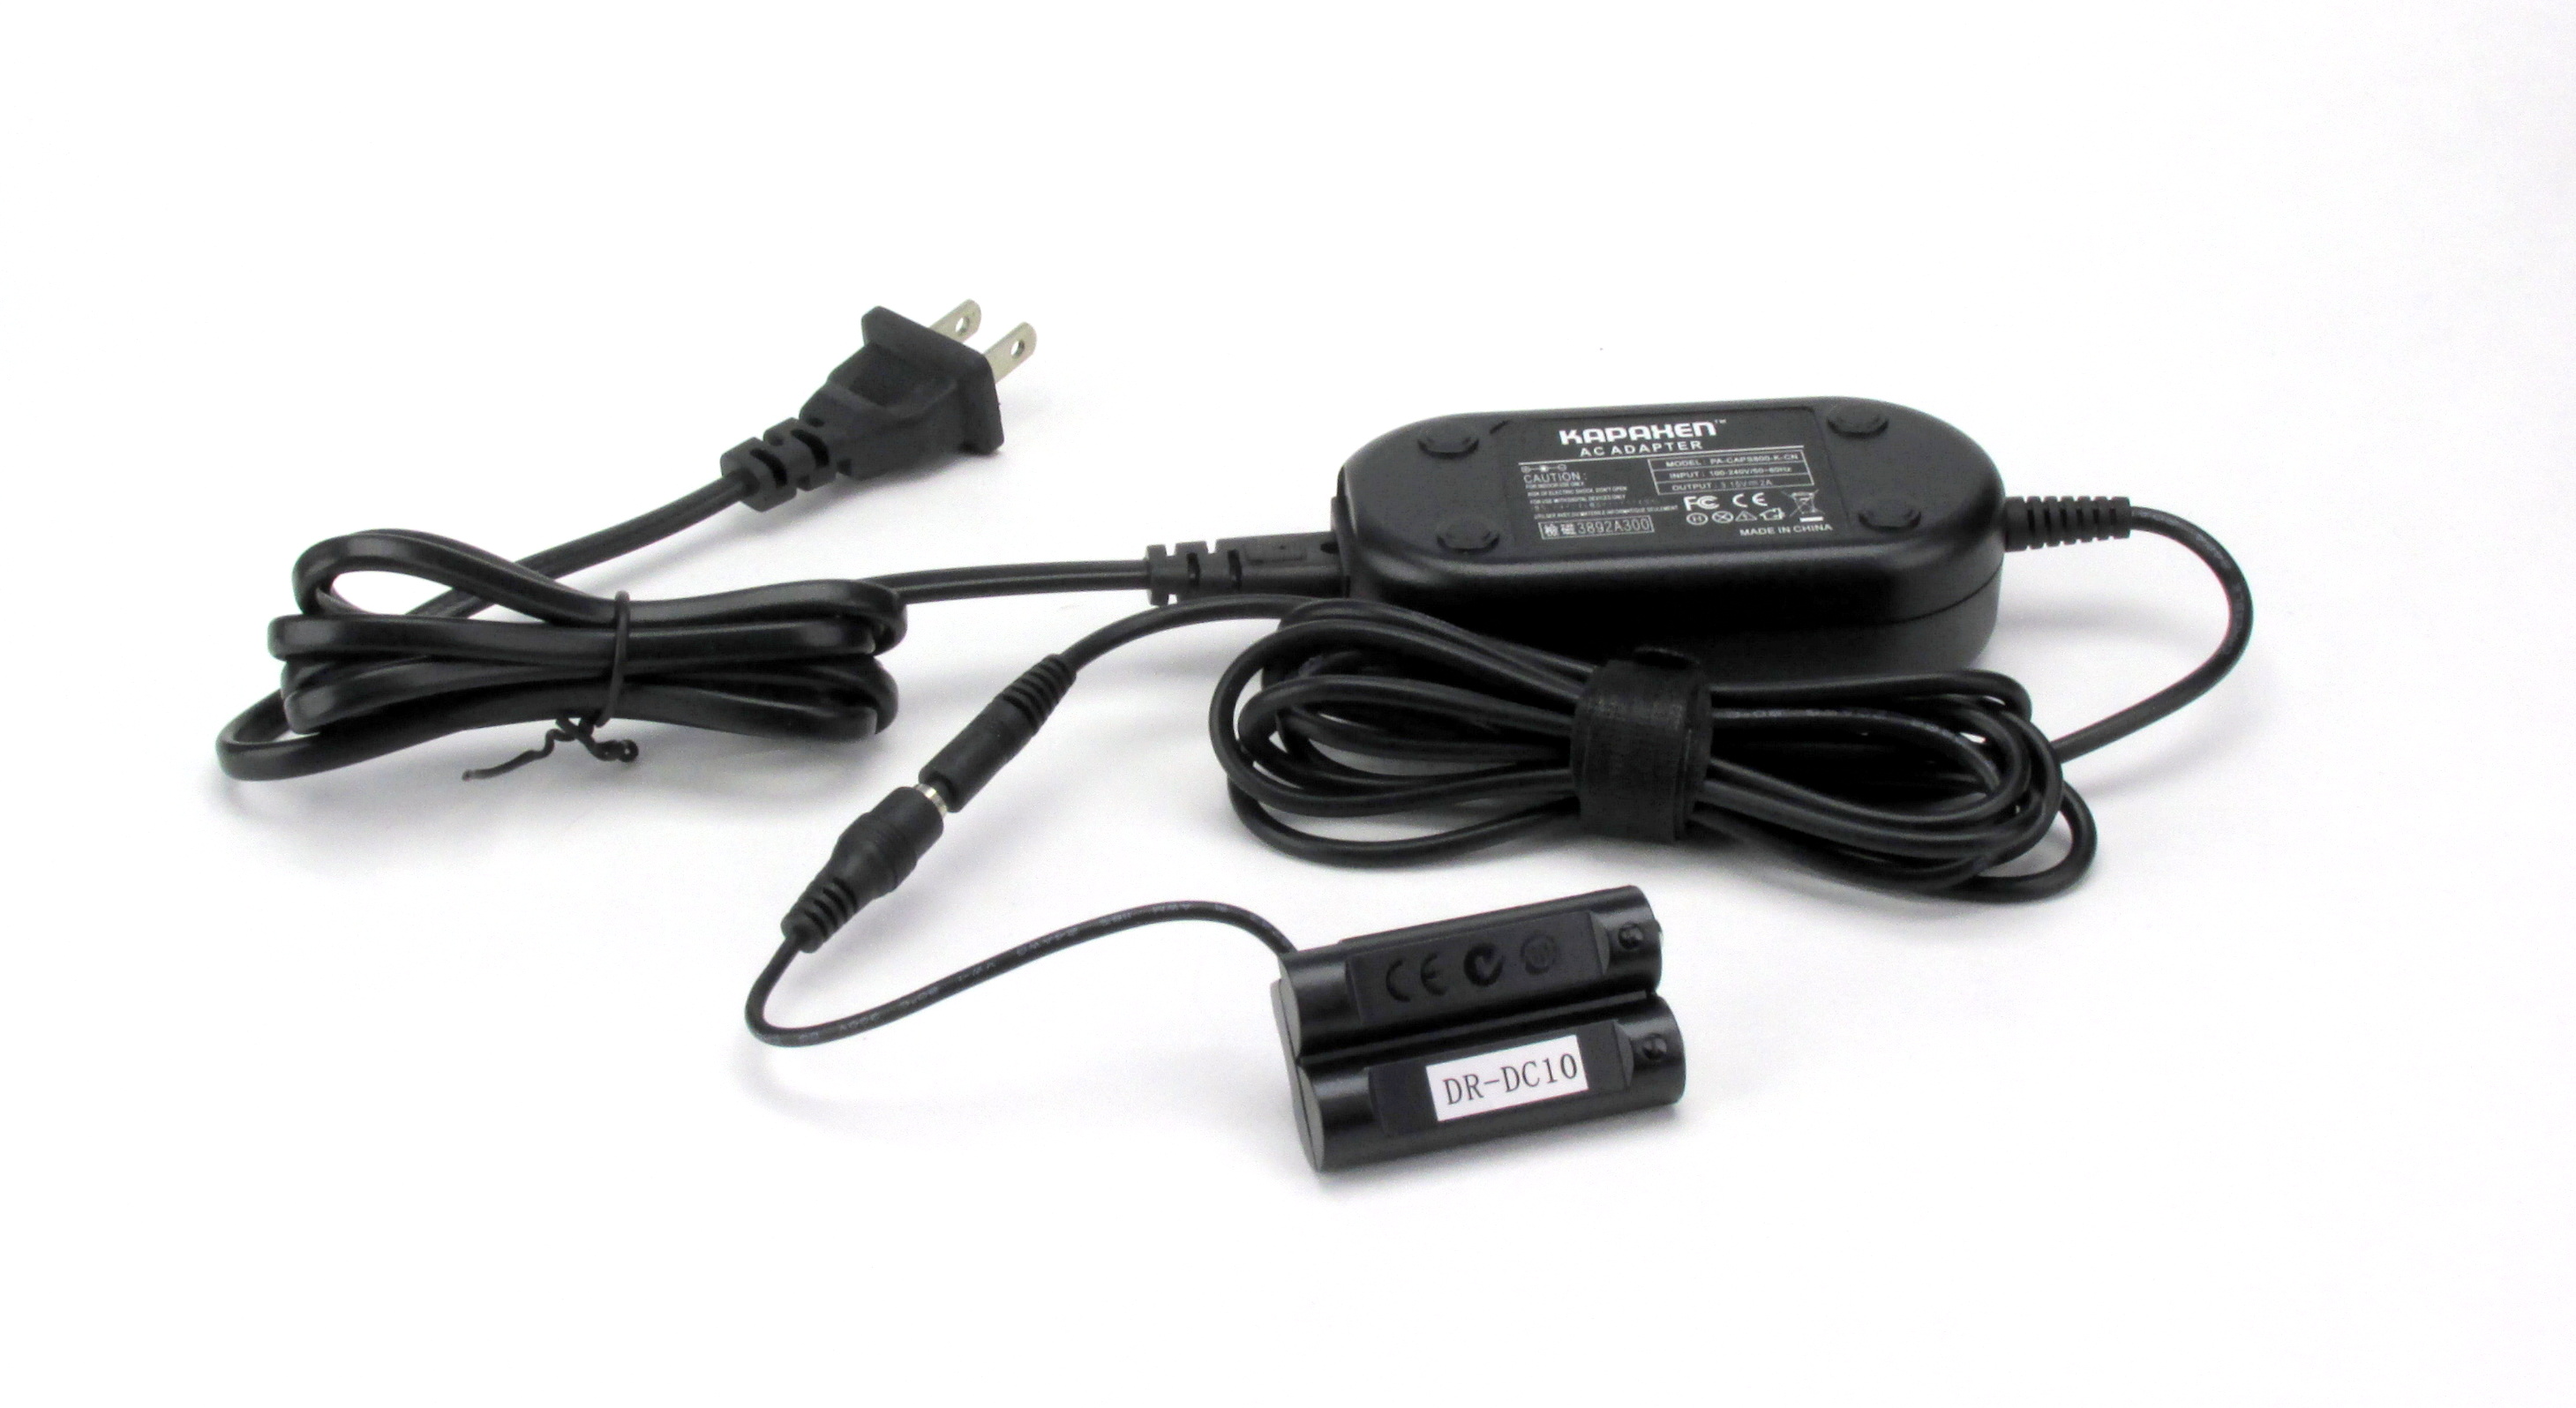 DC-10 AC Adapter for Canon SX160is Camera